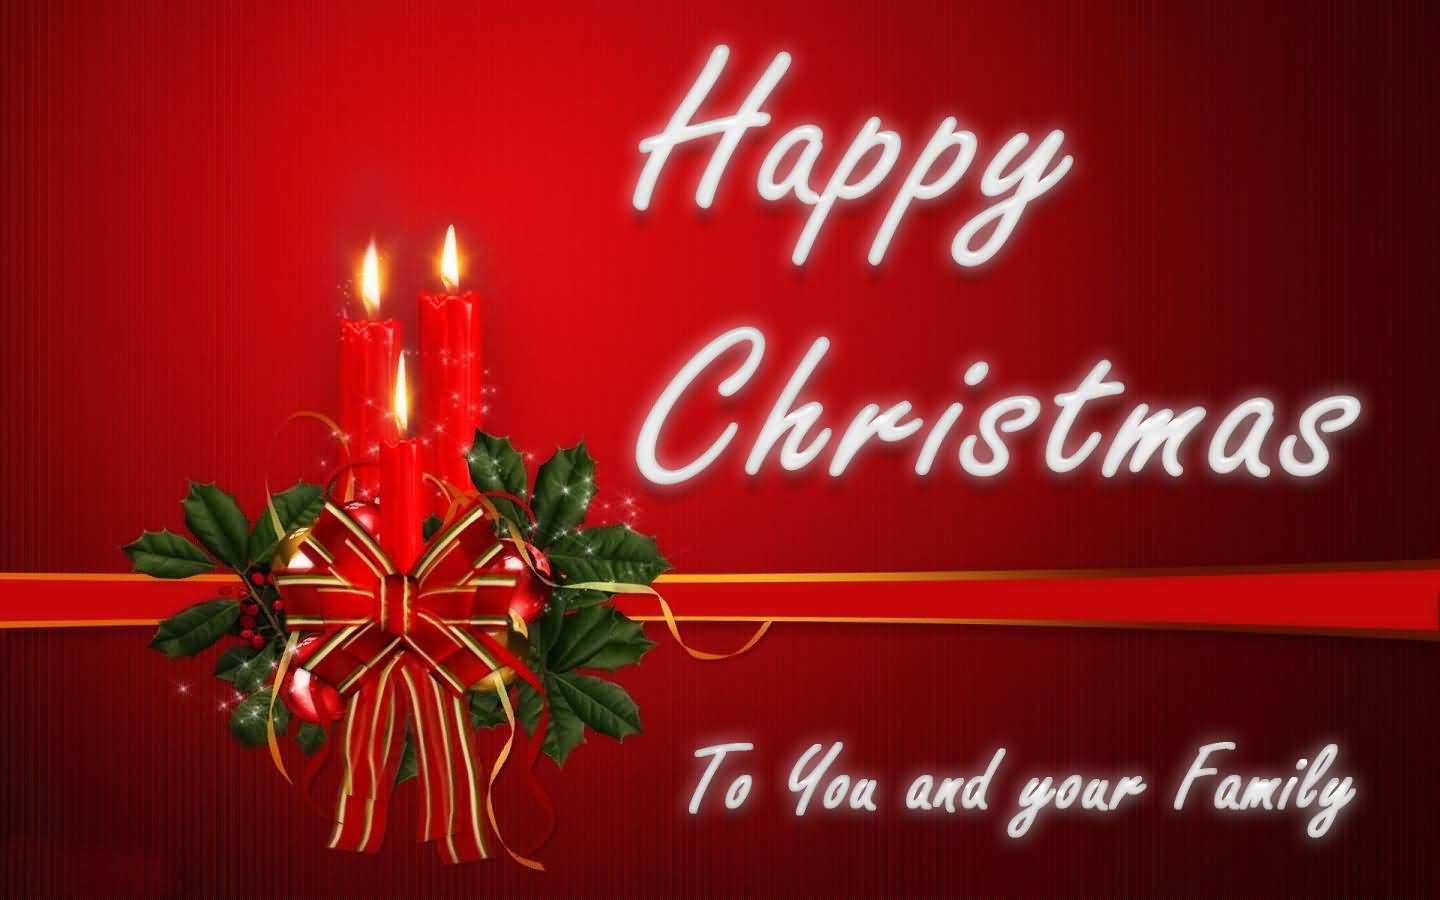 Happy-Christmas-To-You-And-Your-Family.jpg